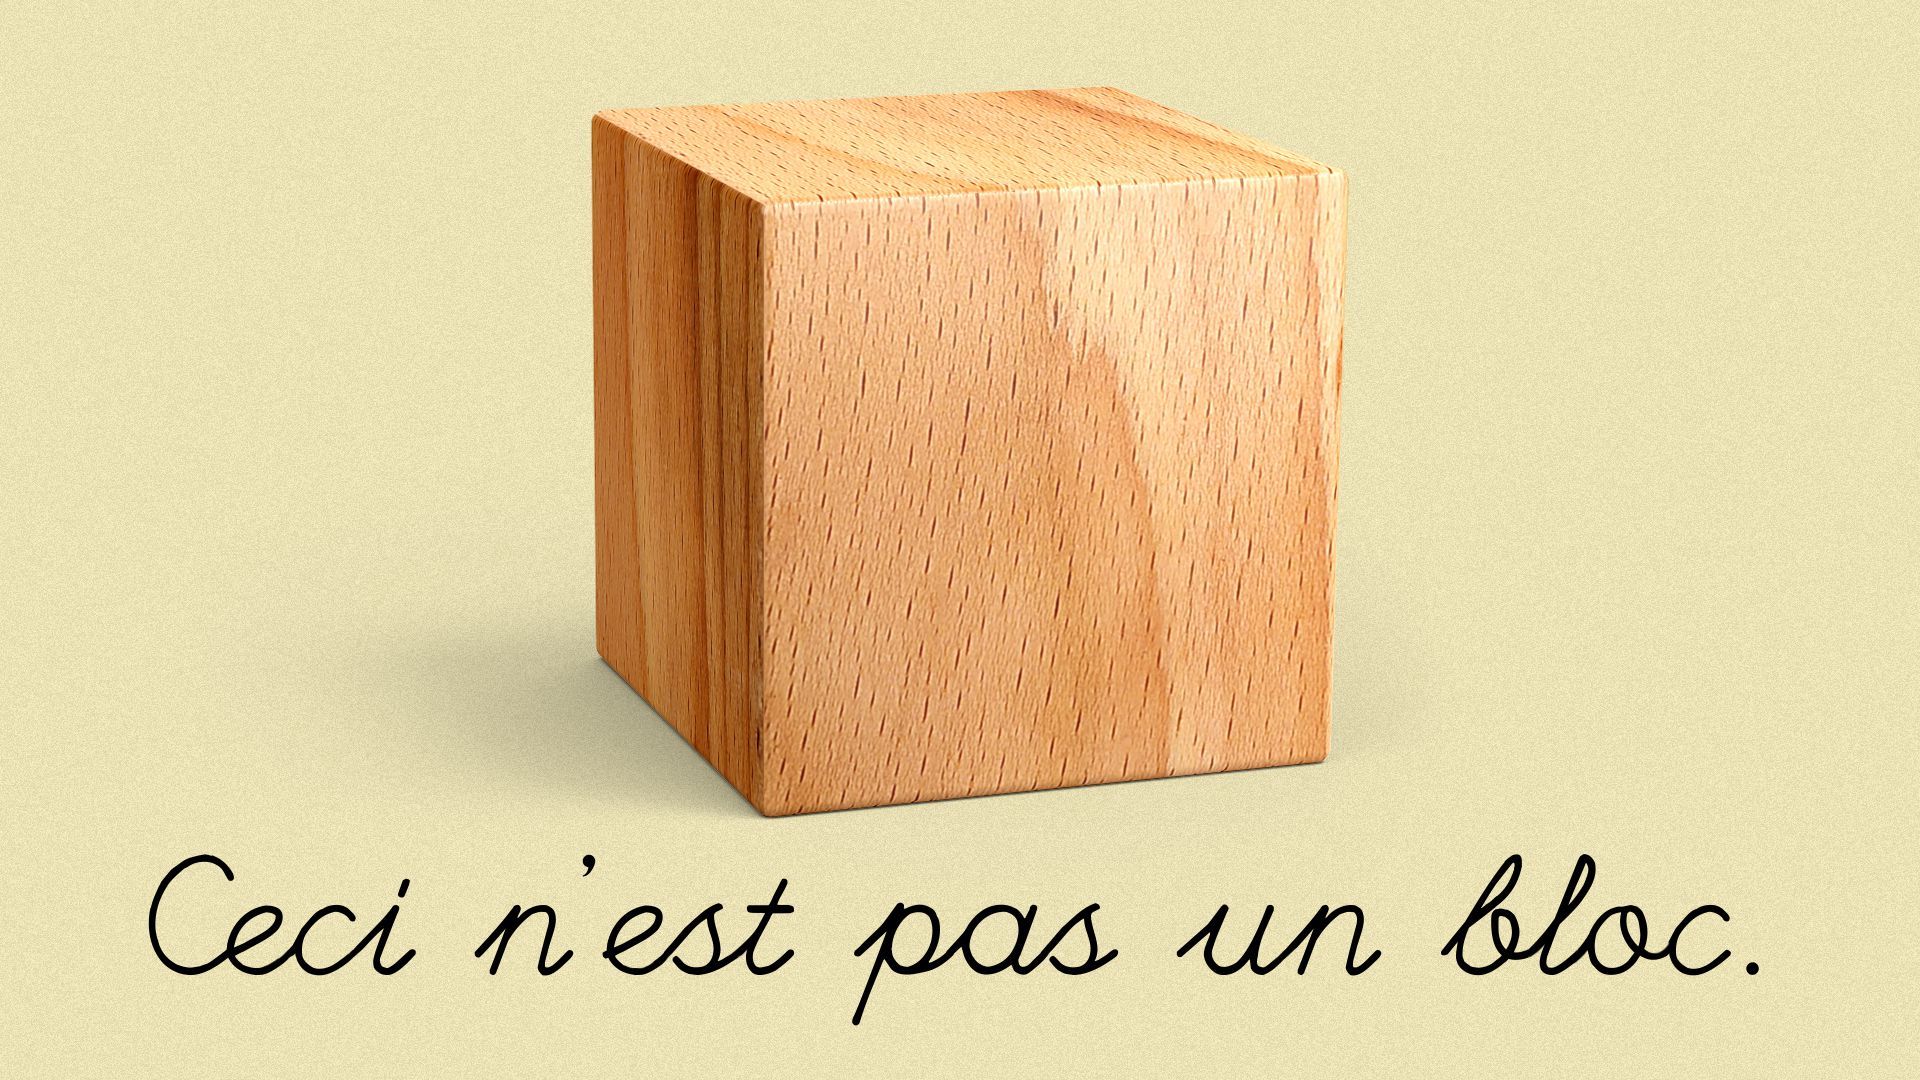 Illustration of a wooden block with the words: "Ceci n'est pas un bloc." after Renee Magritte's "The Treachery of Images" painting.